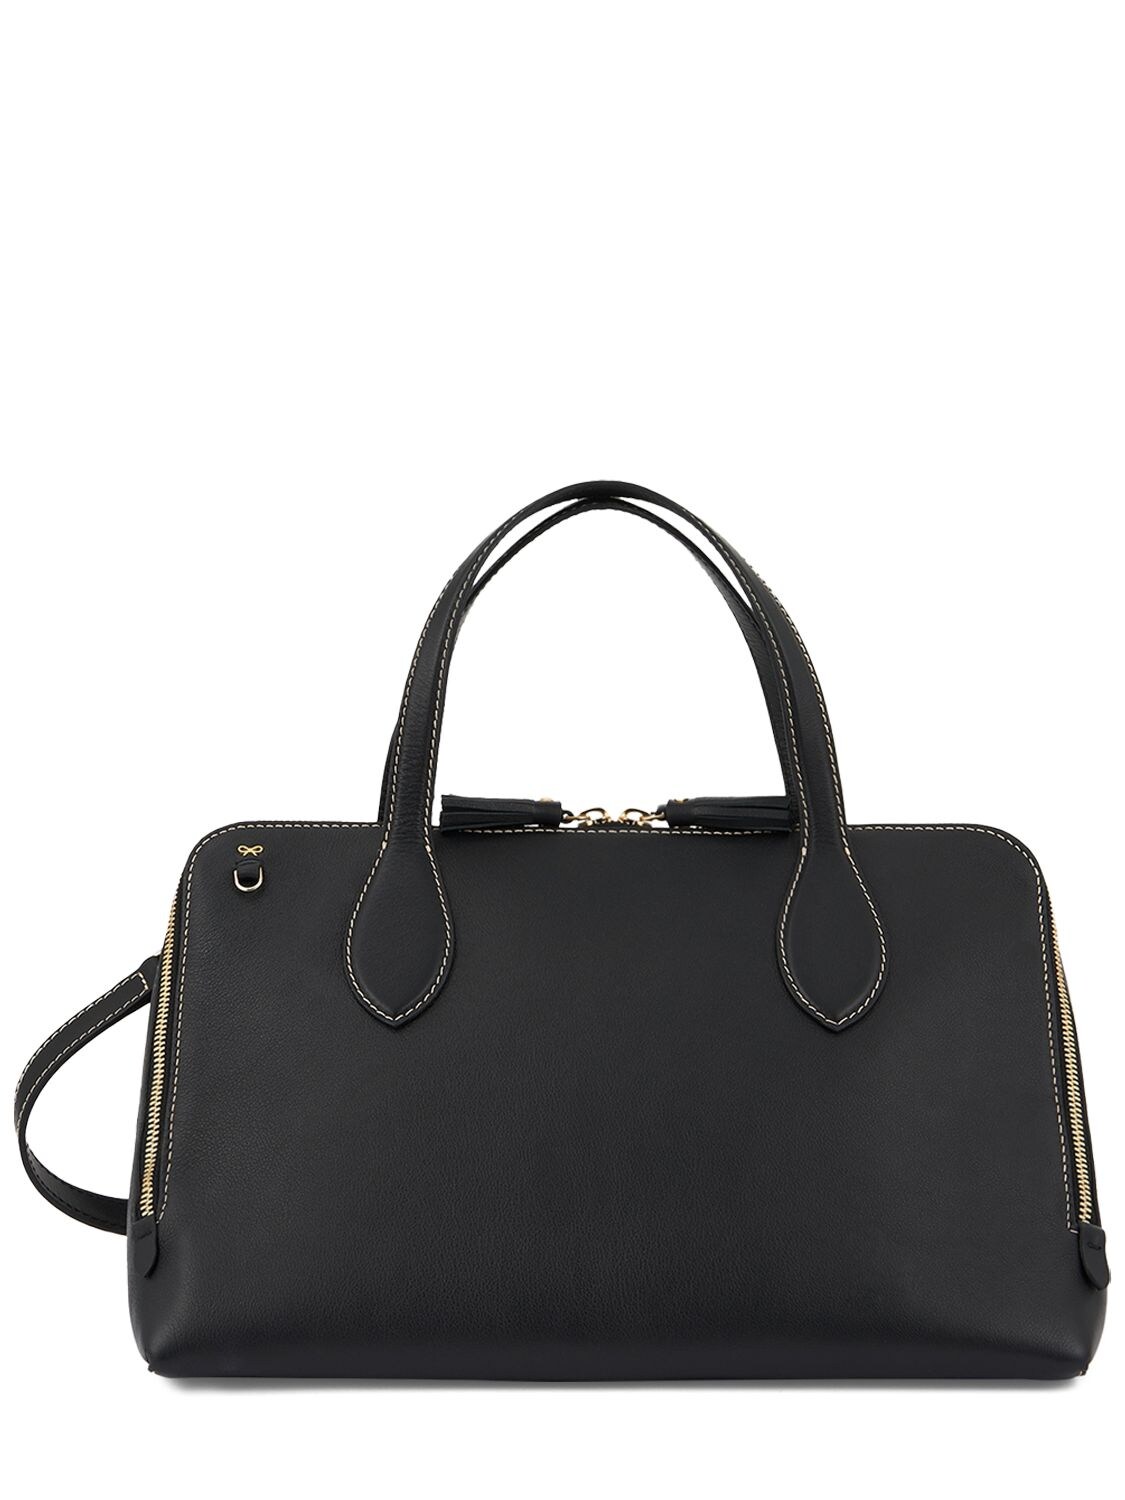 ANYA HINDMARCH The Wedge Leather Top Handle Bag